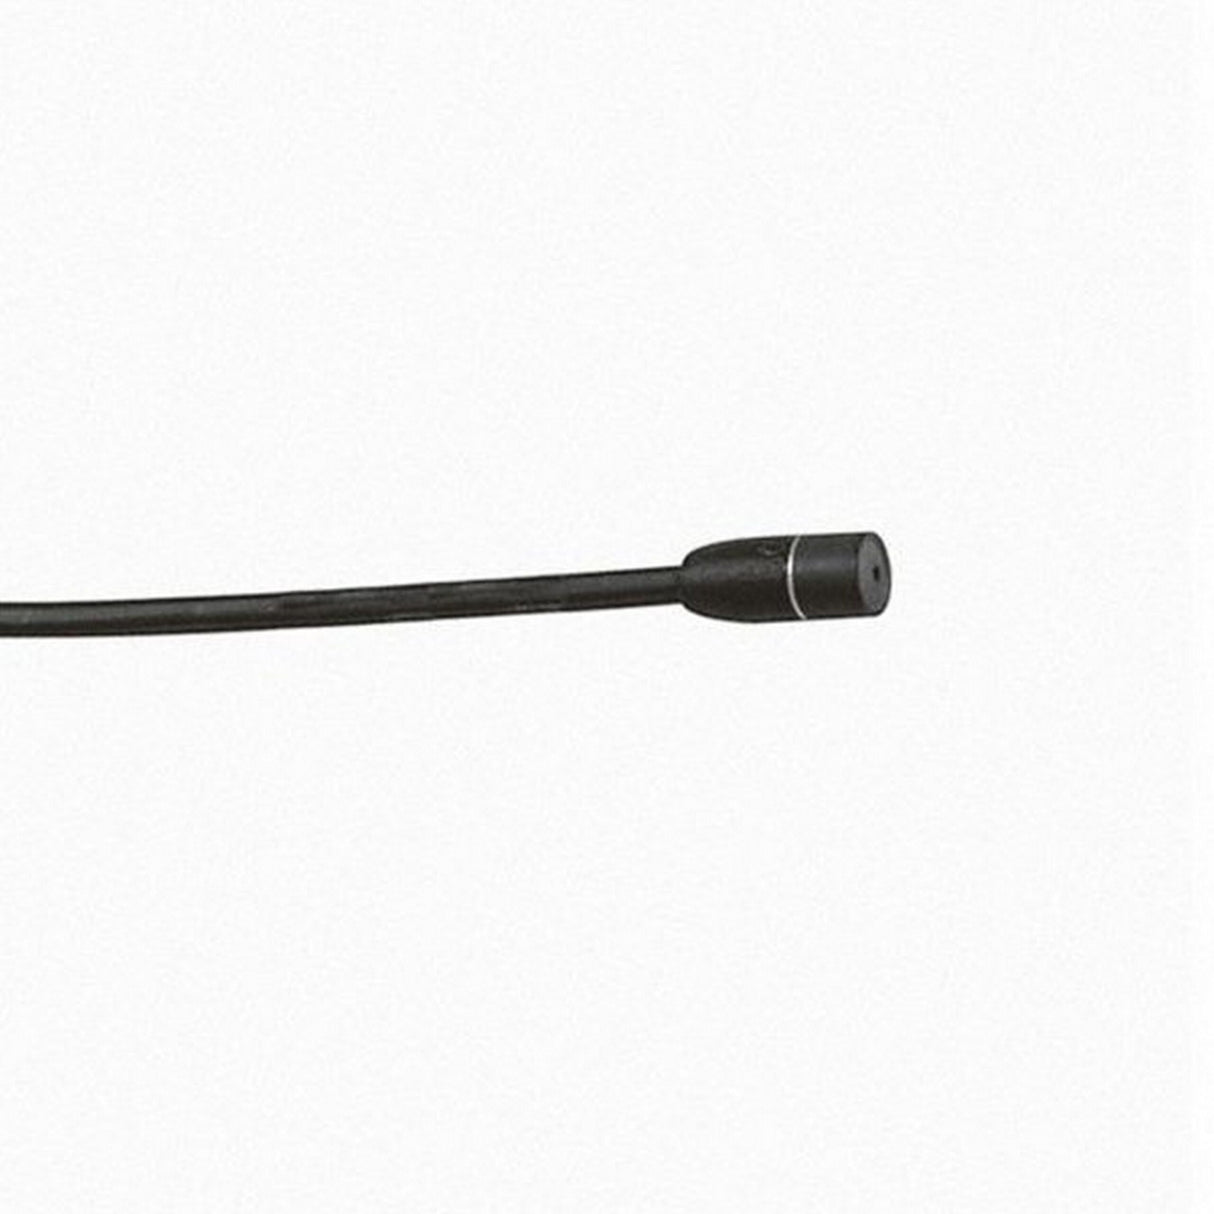 Sennheiser MKE 2 Omni-Directional Lavalier Microphone with Evolution Wireless Connector, Black (Used)